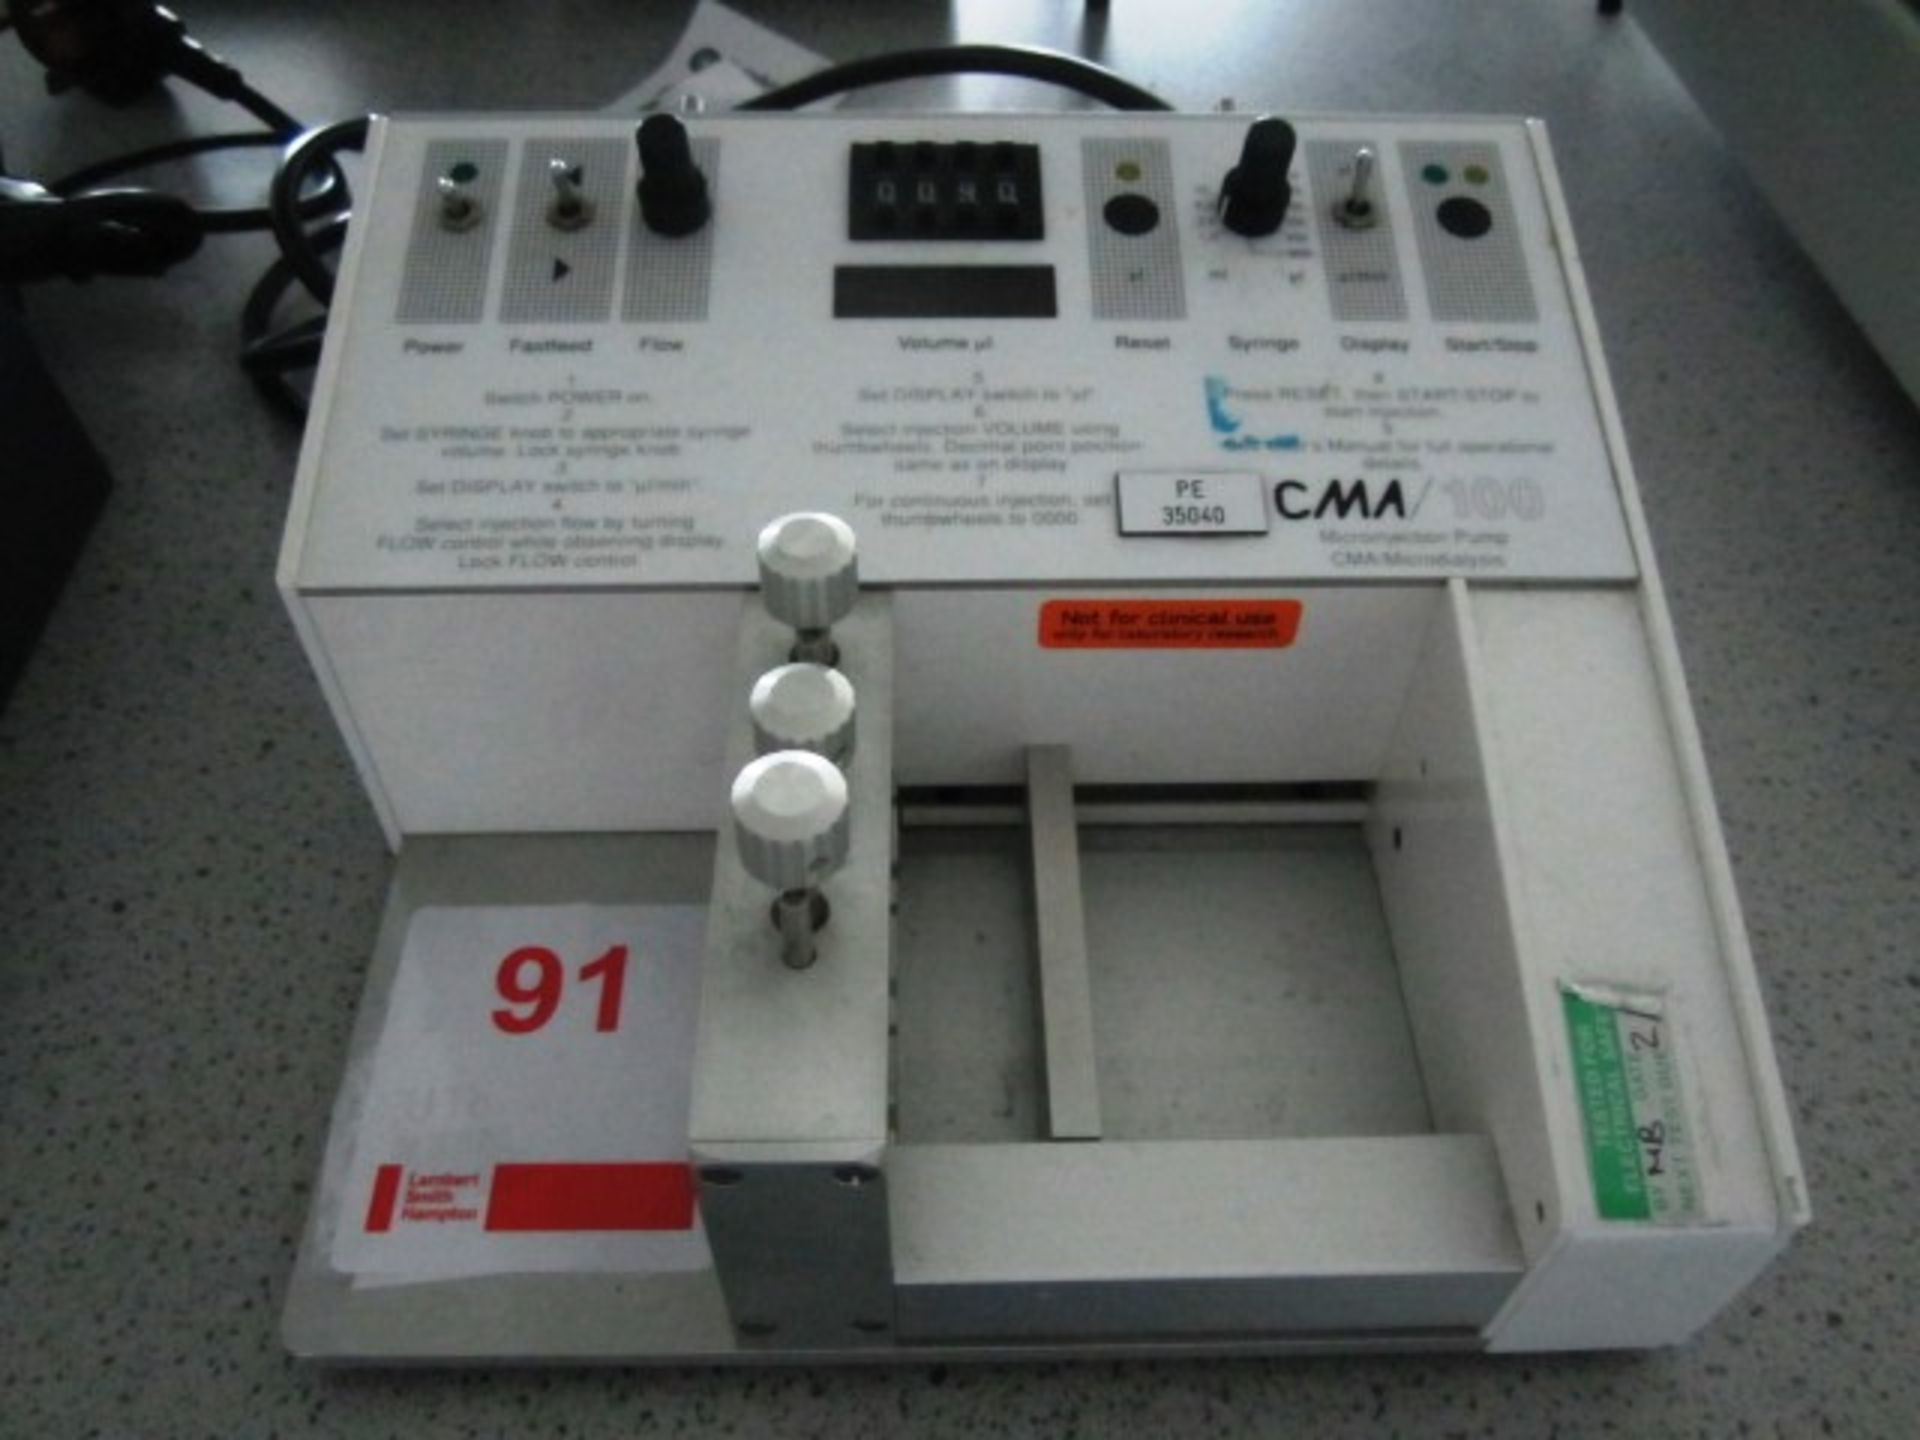 Biotech CMA100 micro injection pump, serial number 1450 (height 100mm x width 200mm x depth 230mm)